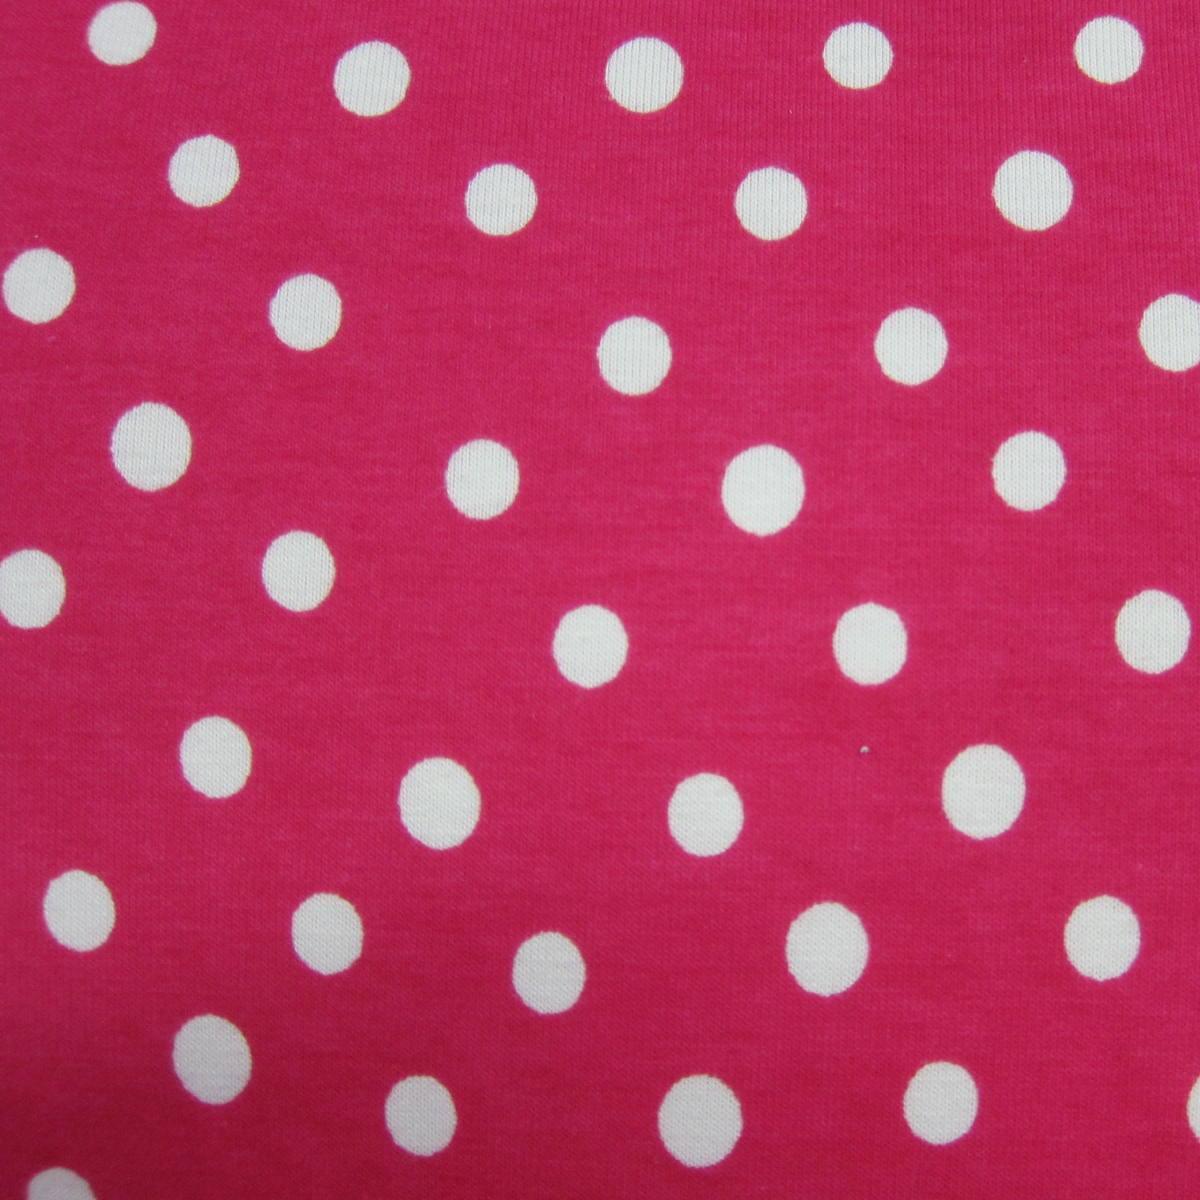 White Pencil Dots on Hot Pink Cotton Jersey